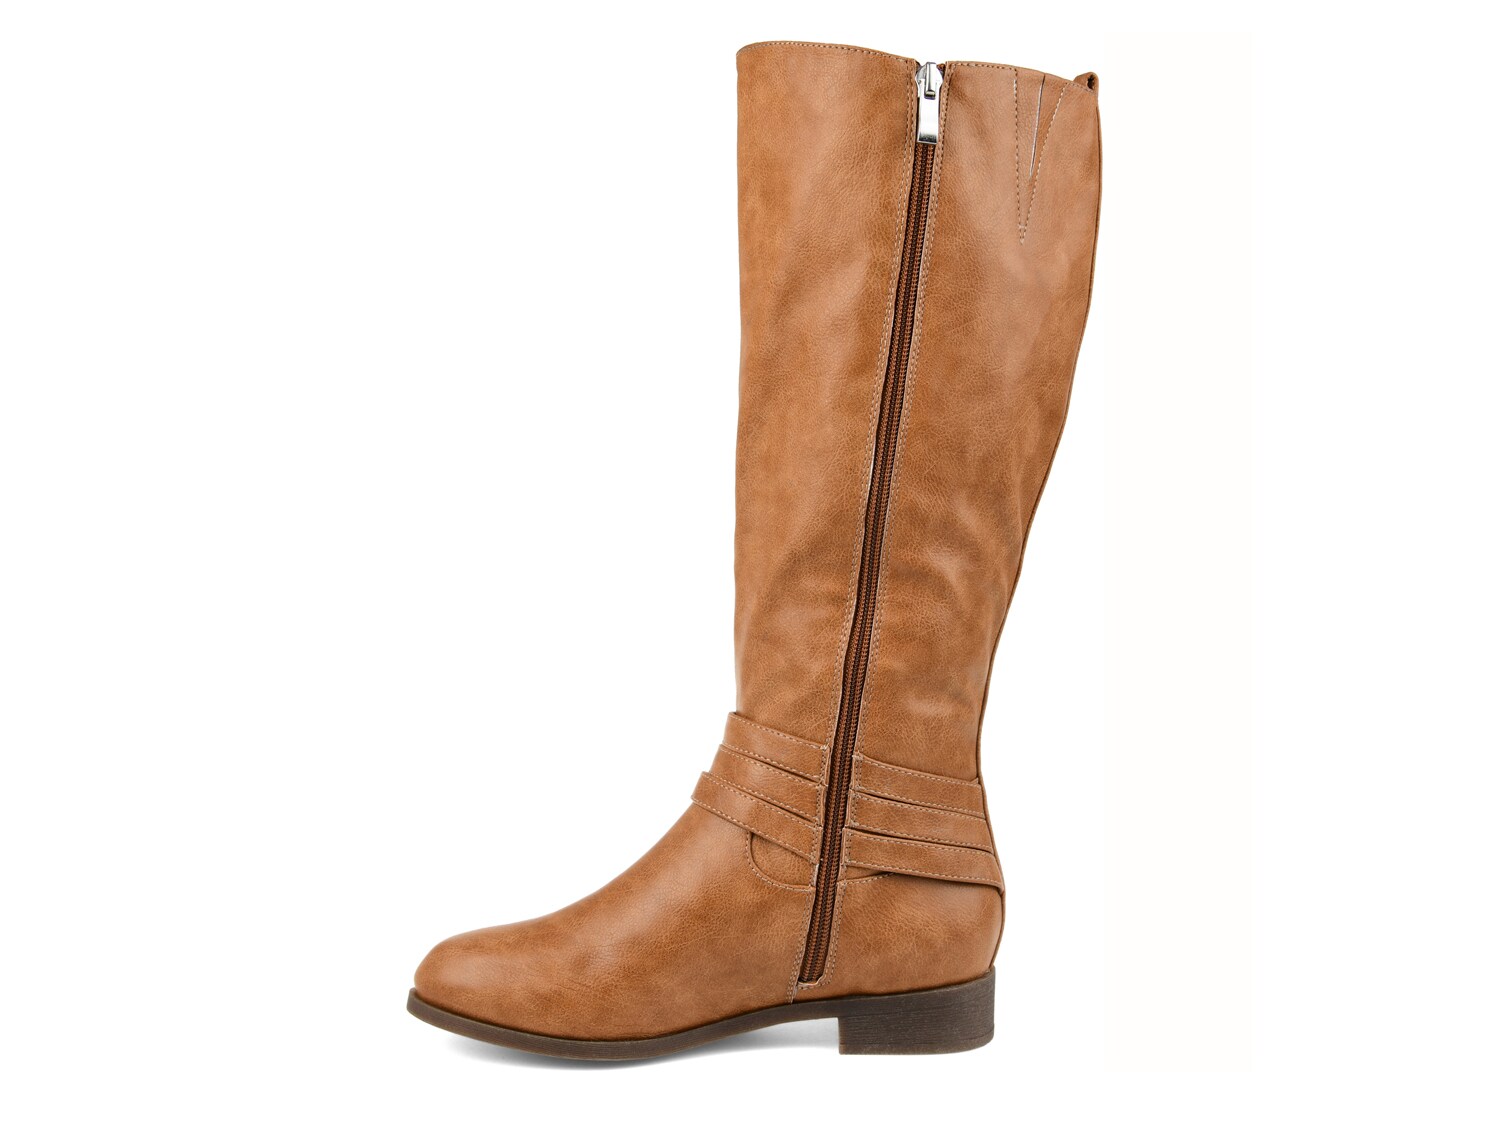 Journee Collection Ivie Extra Wide Calf Riding Boot | DSW